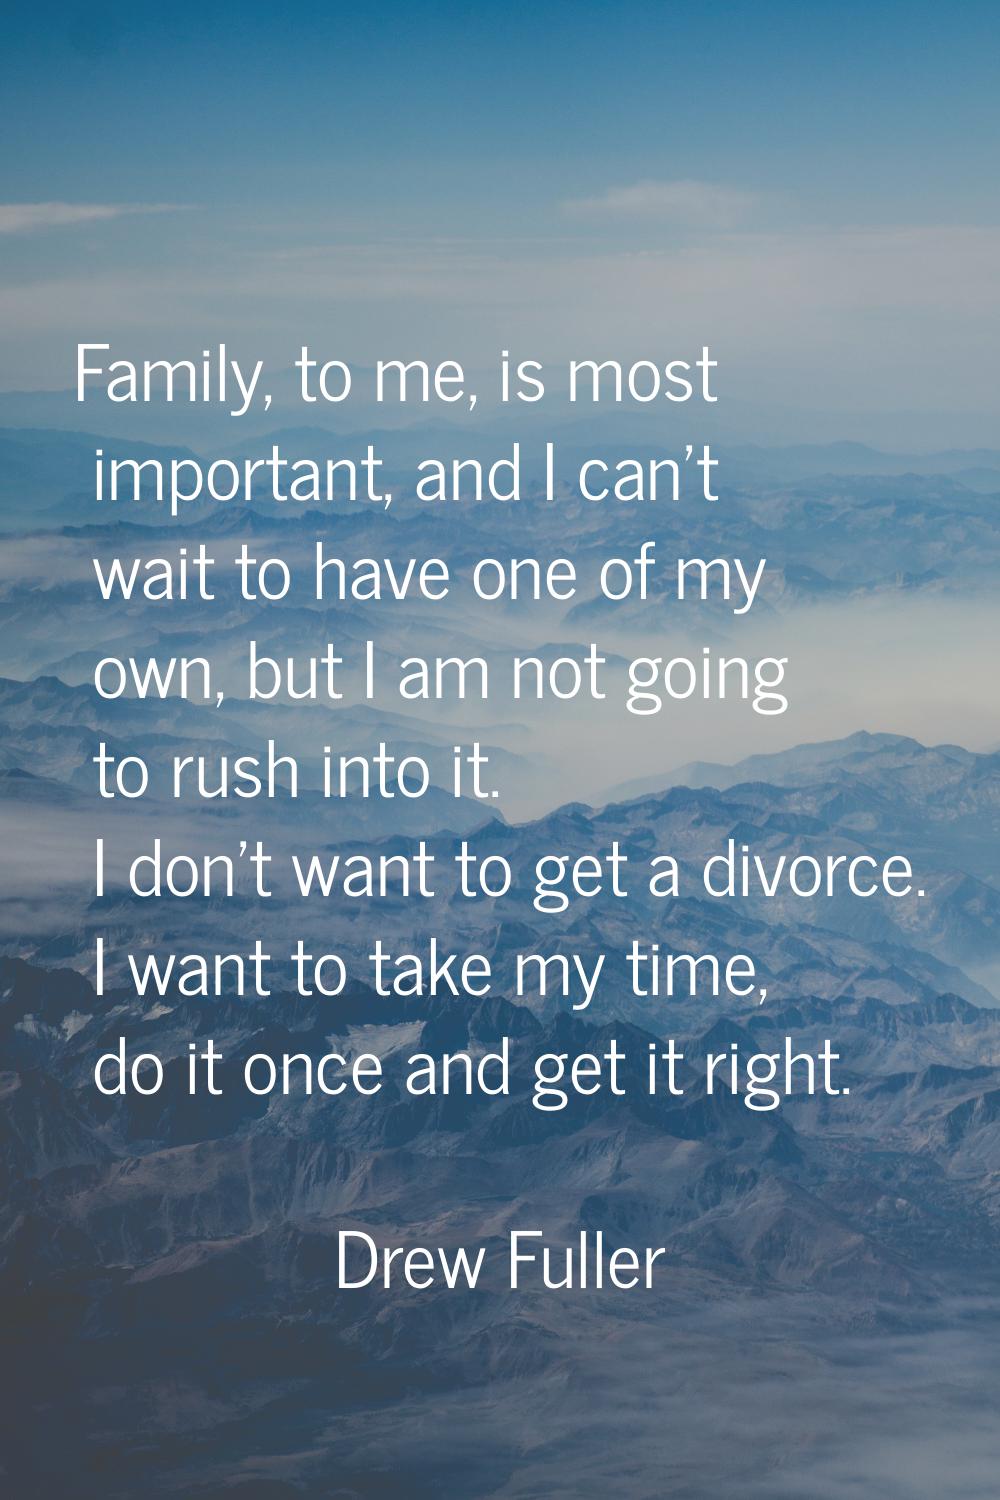 Family, to me, is most important, and I can't wait to have one of my own, but I am not going to rus